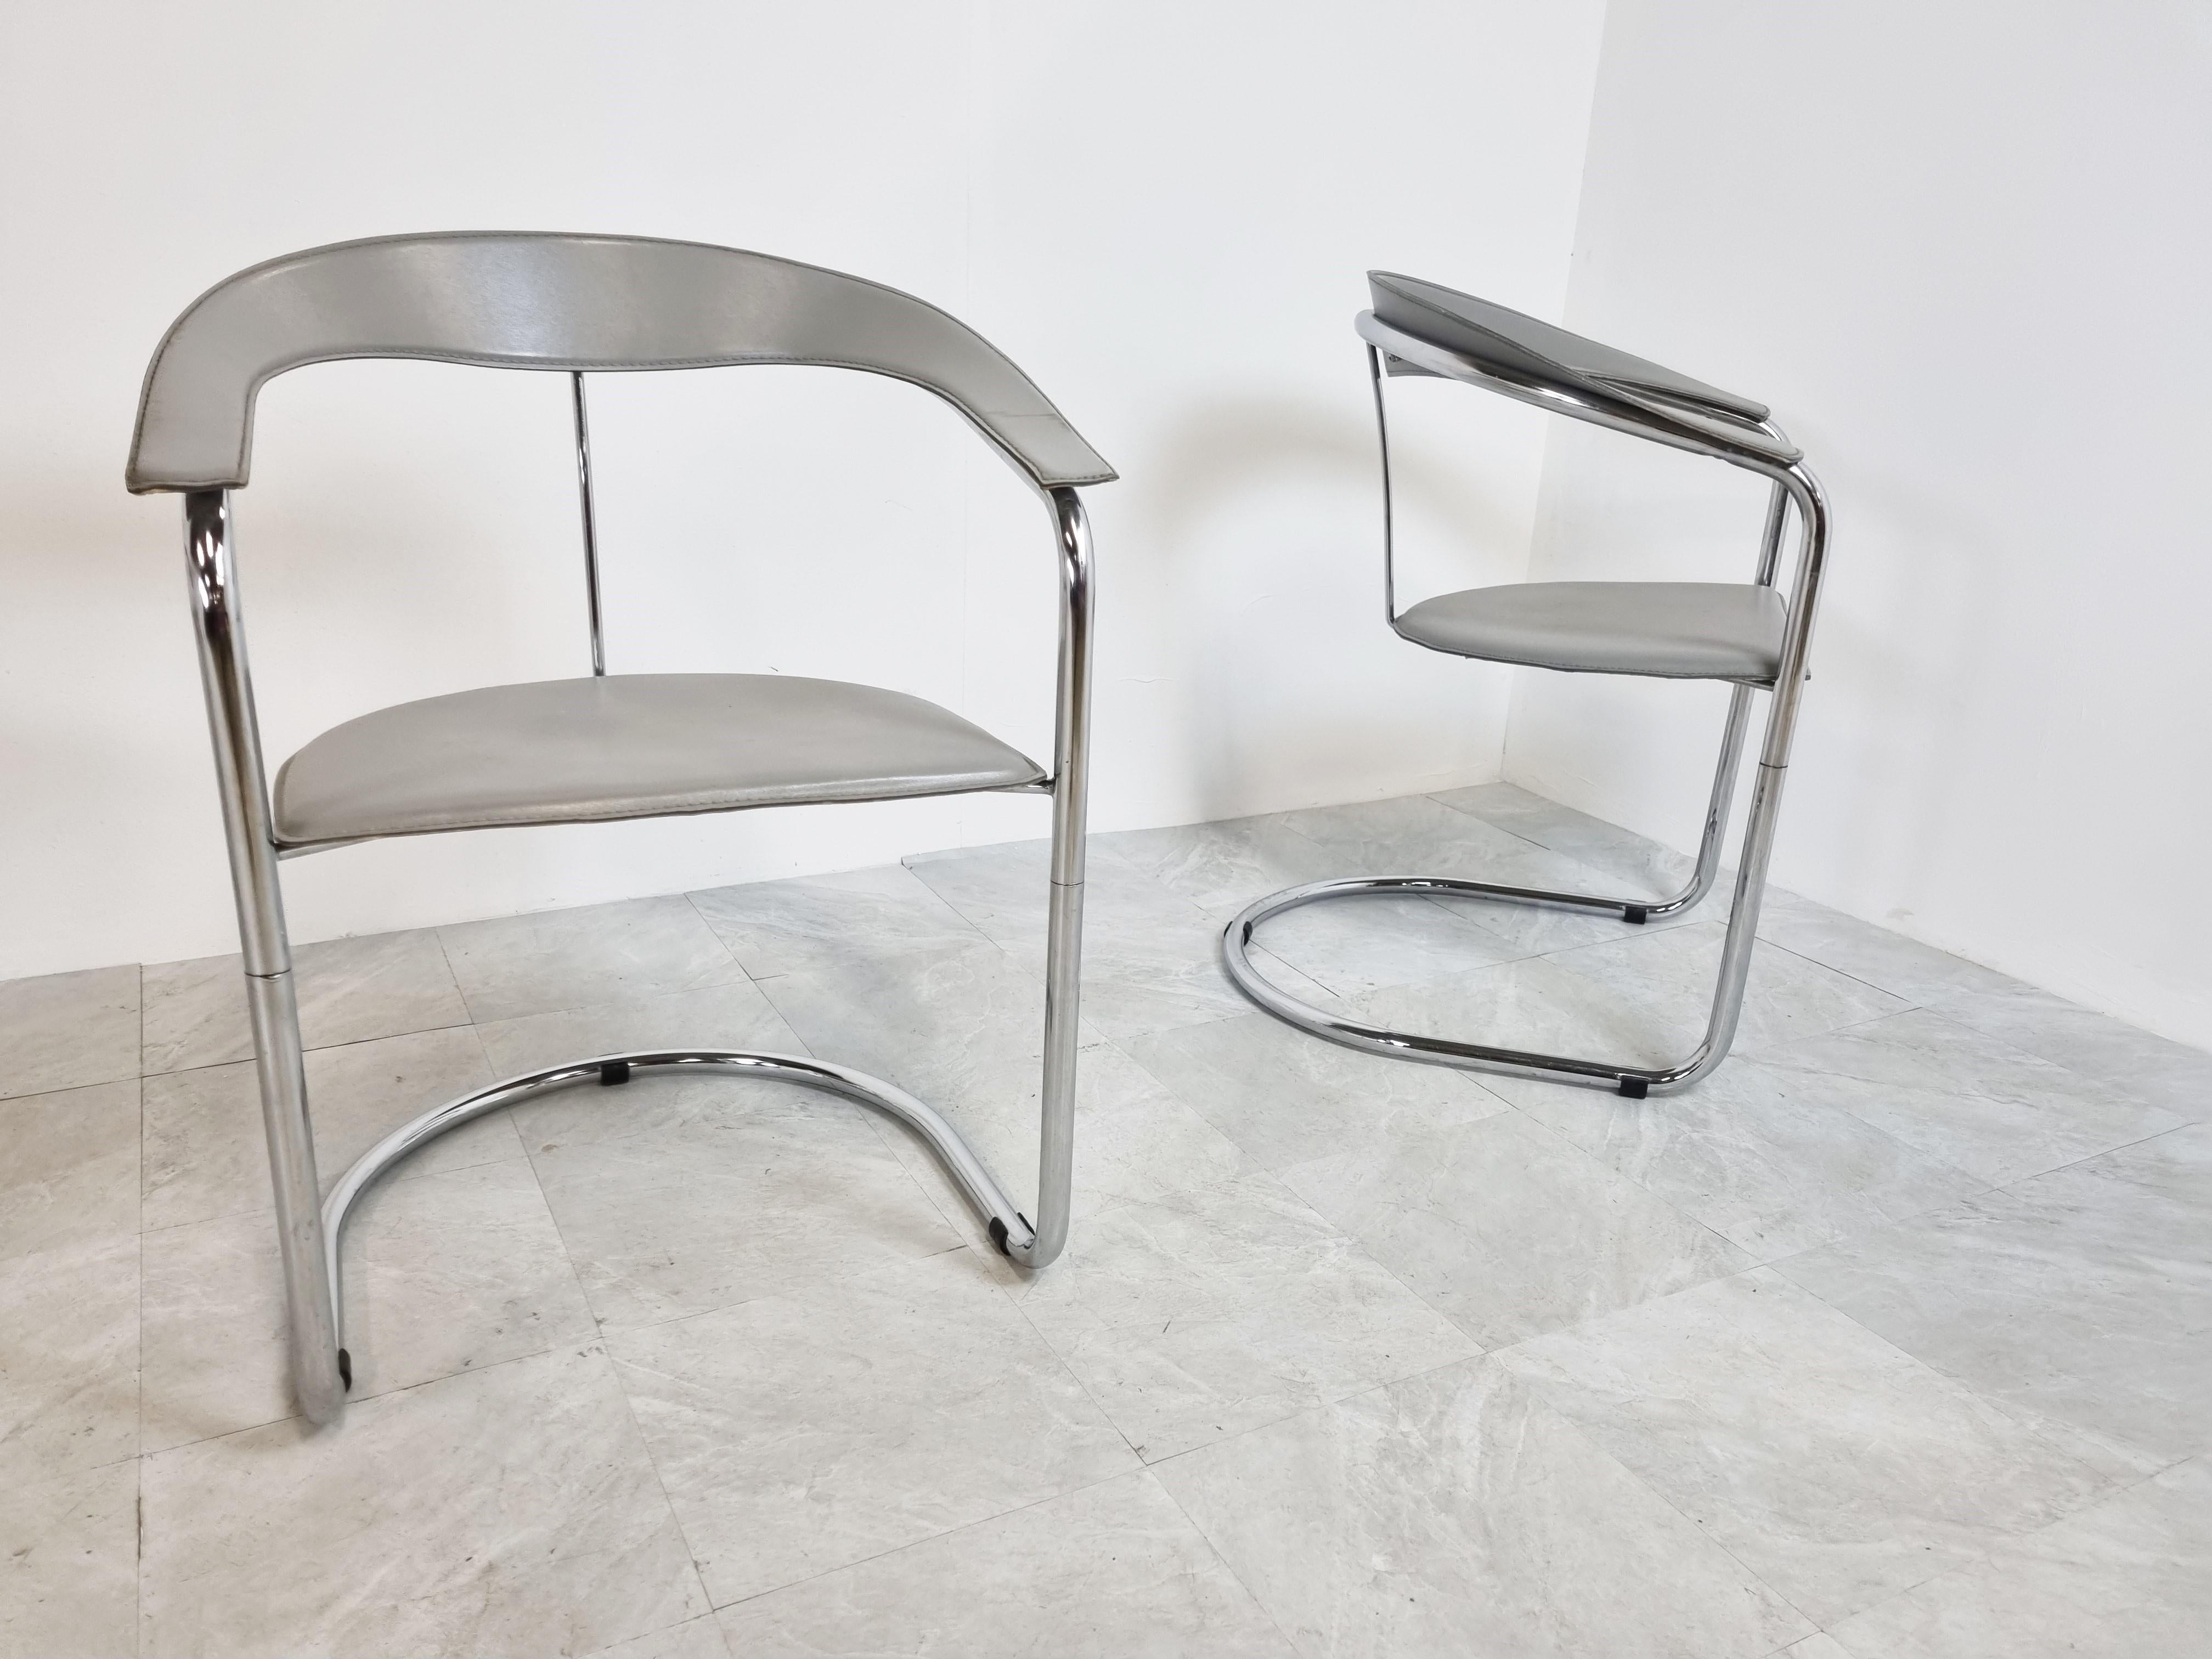 Vintage cantilever tubular chrome and grey stitched leather armchairs or dining chairs.

Timeless design.

Good condition.

1980s - Italy

Dimensions:

Height: 87 cm/ 34.25